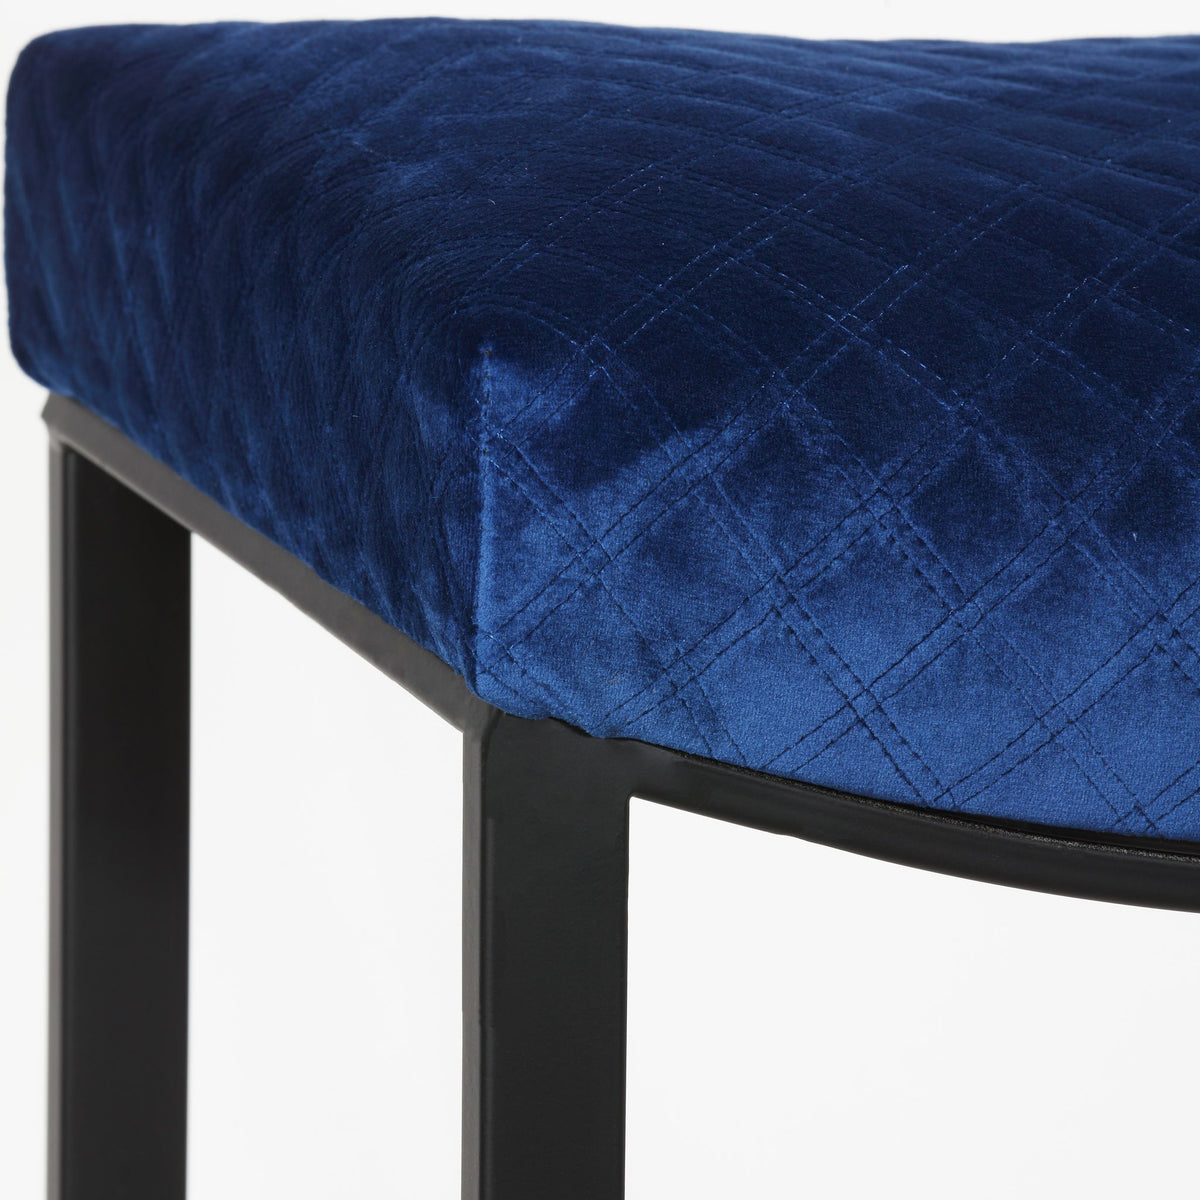 Cortesi Home Portales Counterstool, Brushed Black Legs and Navy Blue Fabric